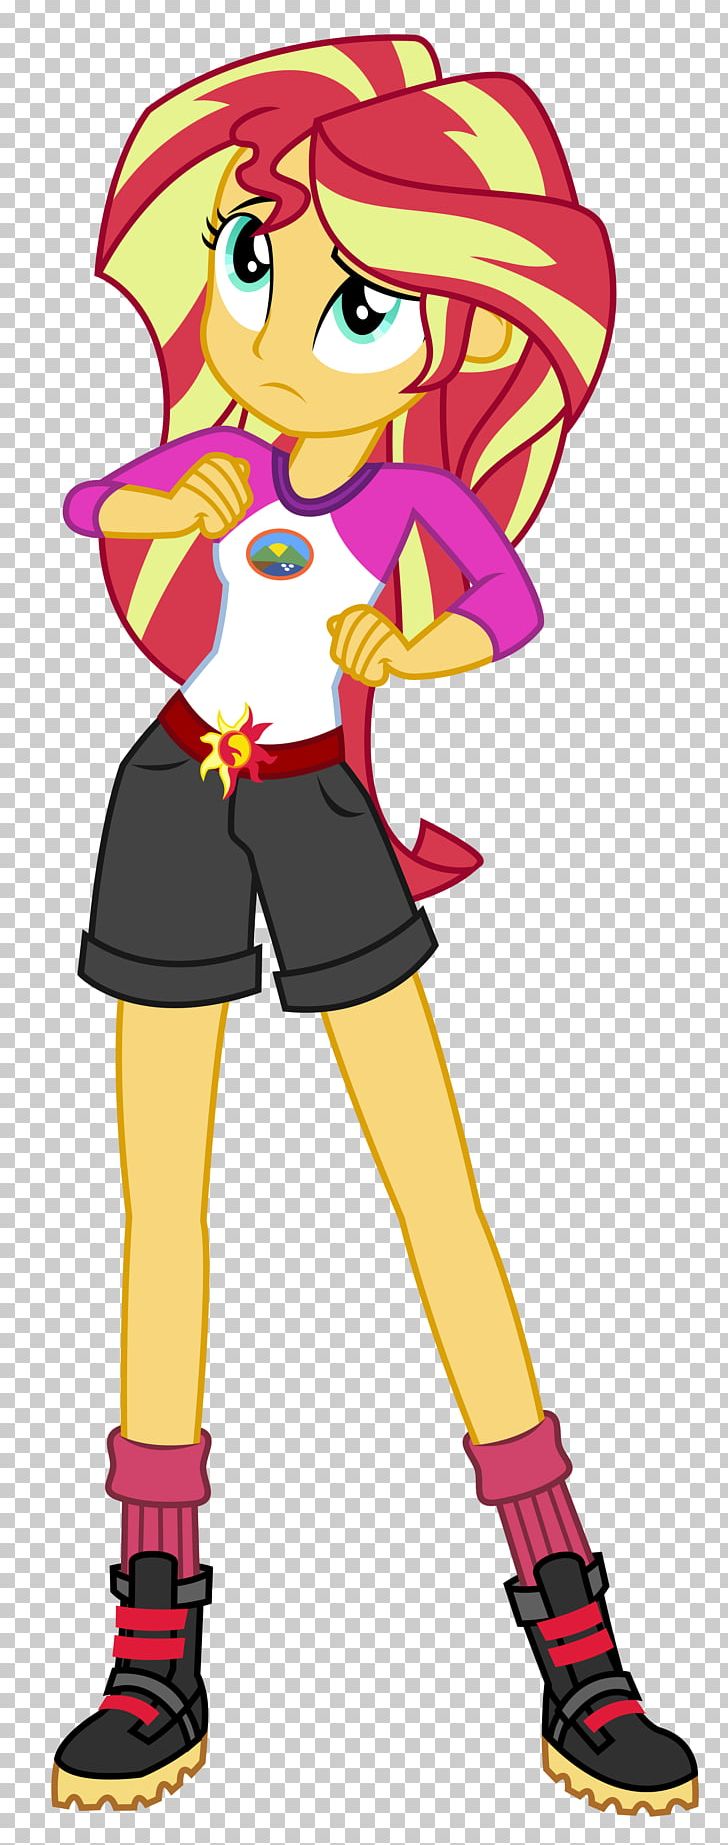 Sunset Shimmer Twilight Sparkle Rainbow Dash Pinkie Pie Art PNG, Clipart, Artwork, Cartoon, Character, Clothing, Deviantart Free PNG Download